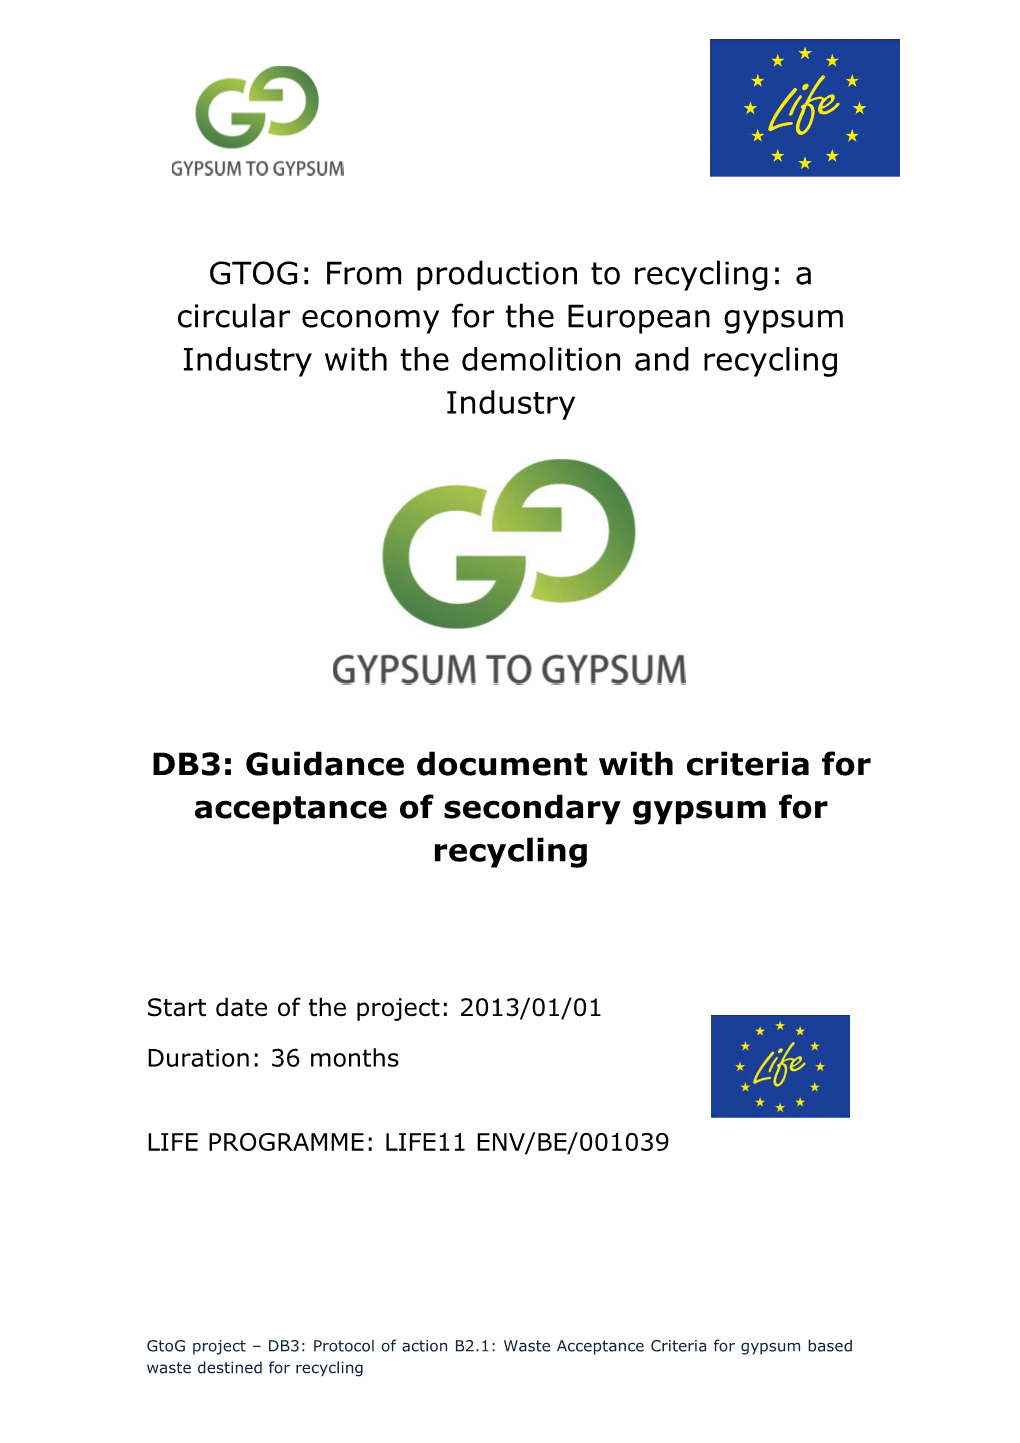 Waste Acceptance Criteria for Gypsum Based Waste Destined for Recycling